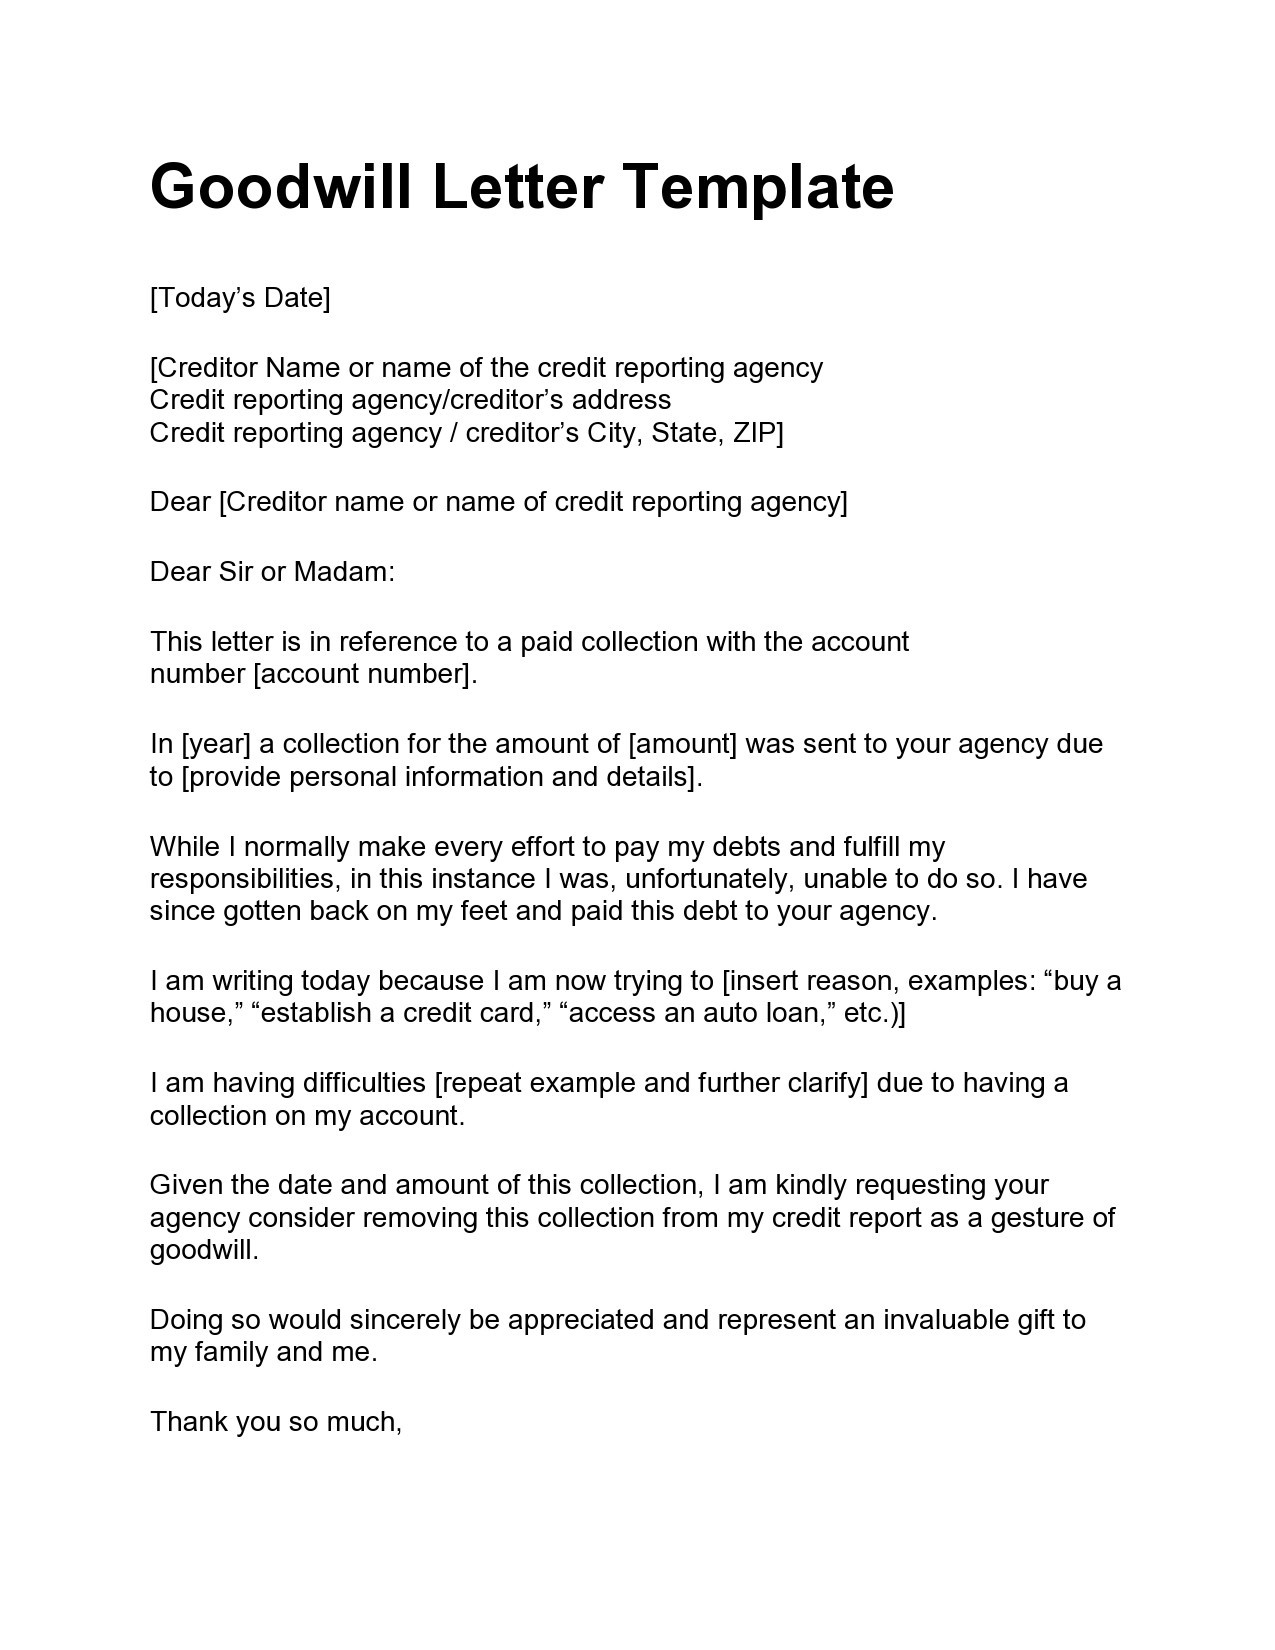 Free goodwill letter template 12